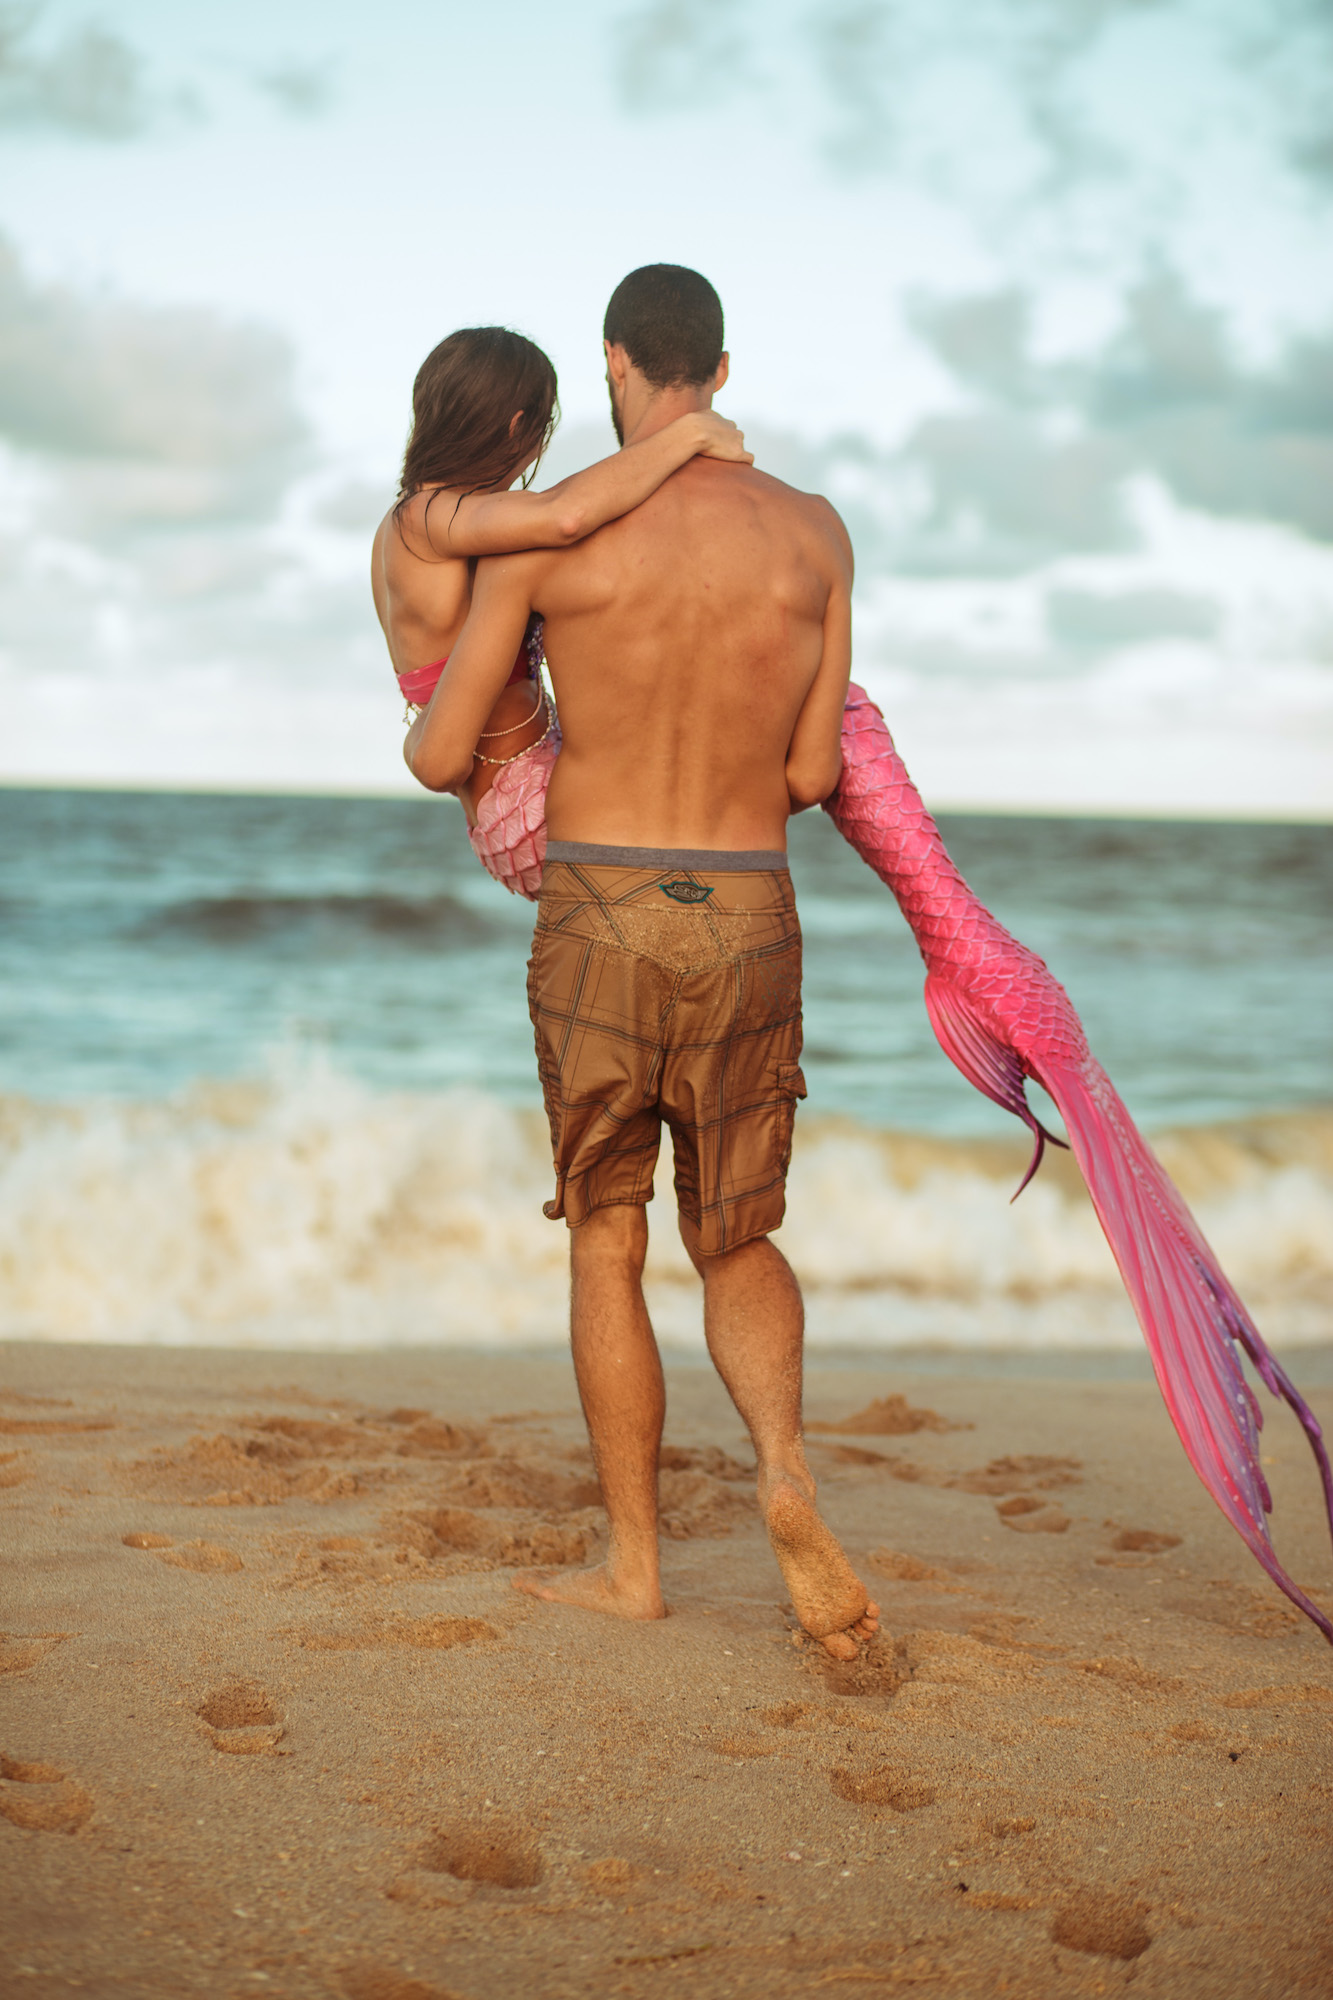 A man on the beach walks towards the crashing waves carrying a pink mermaid in his arms.